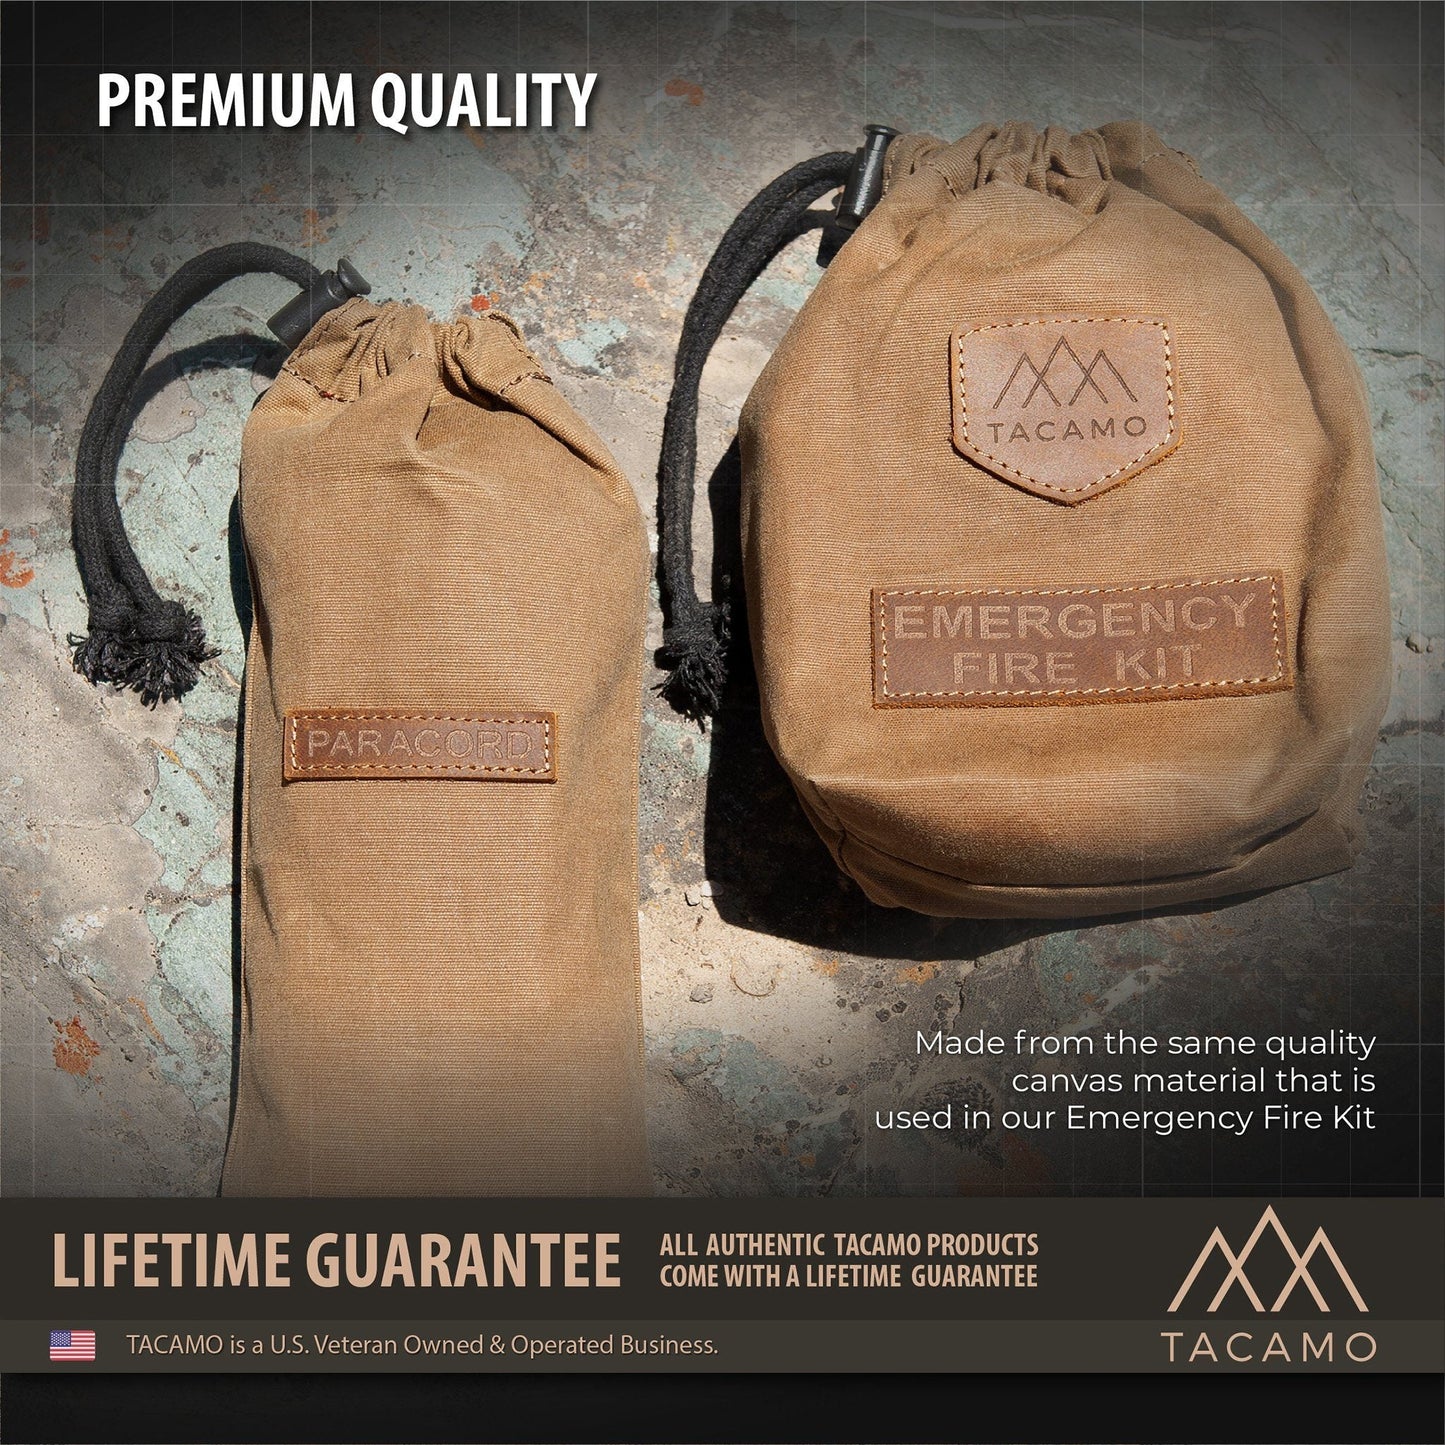 Canvas Bushcraft Bag advertised with a lifetime guarantee for the emergency fire kit